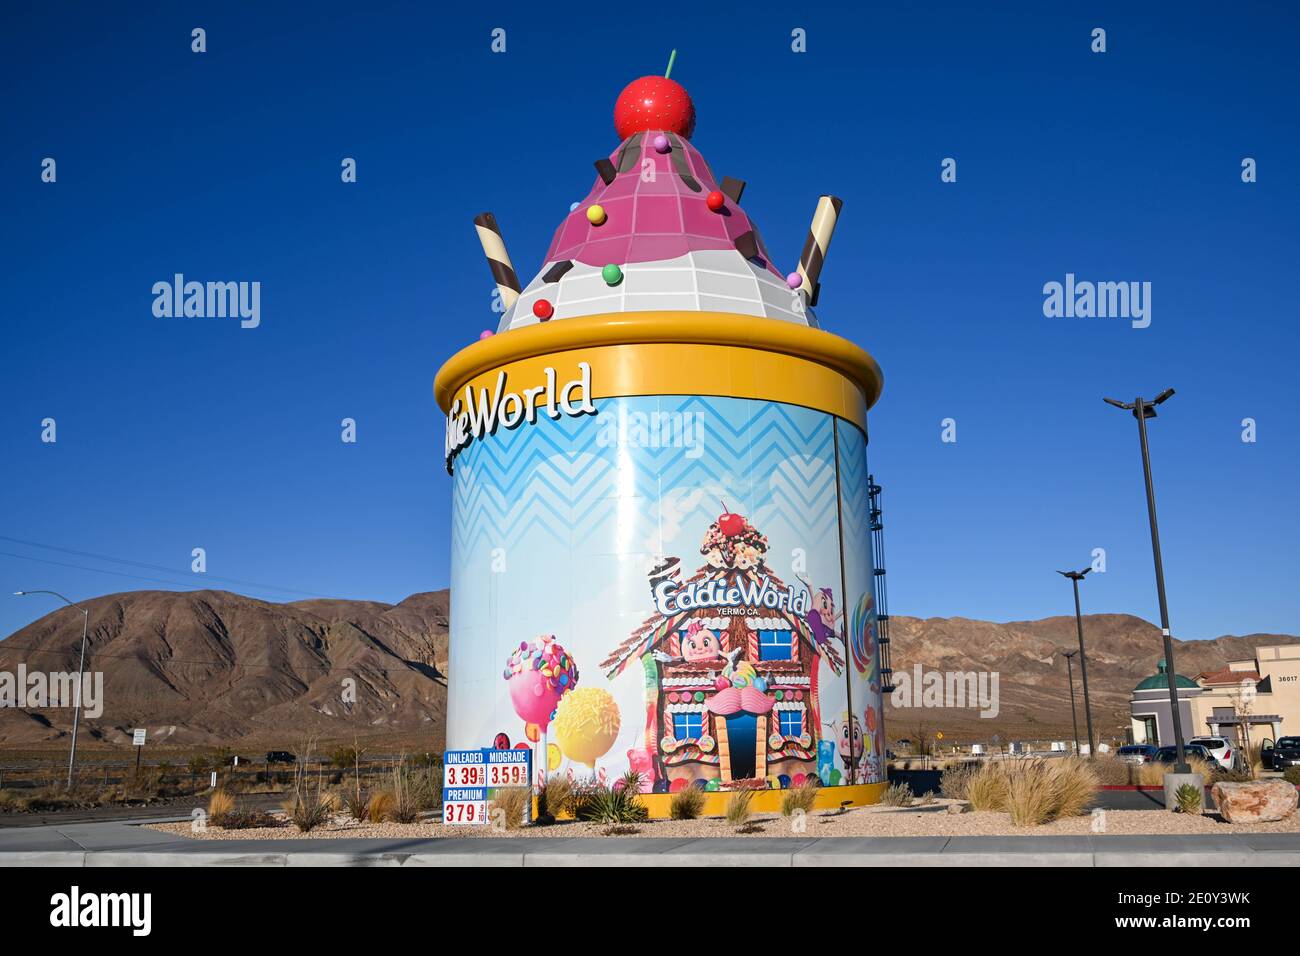 A general view of Eddie World convenience store and gasoline station, Tuesday, Dec. 29, 2020 in Yermo, Calif. (Dylan Stewart/Image of Sport) Stock Photo